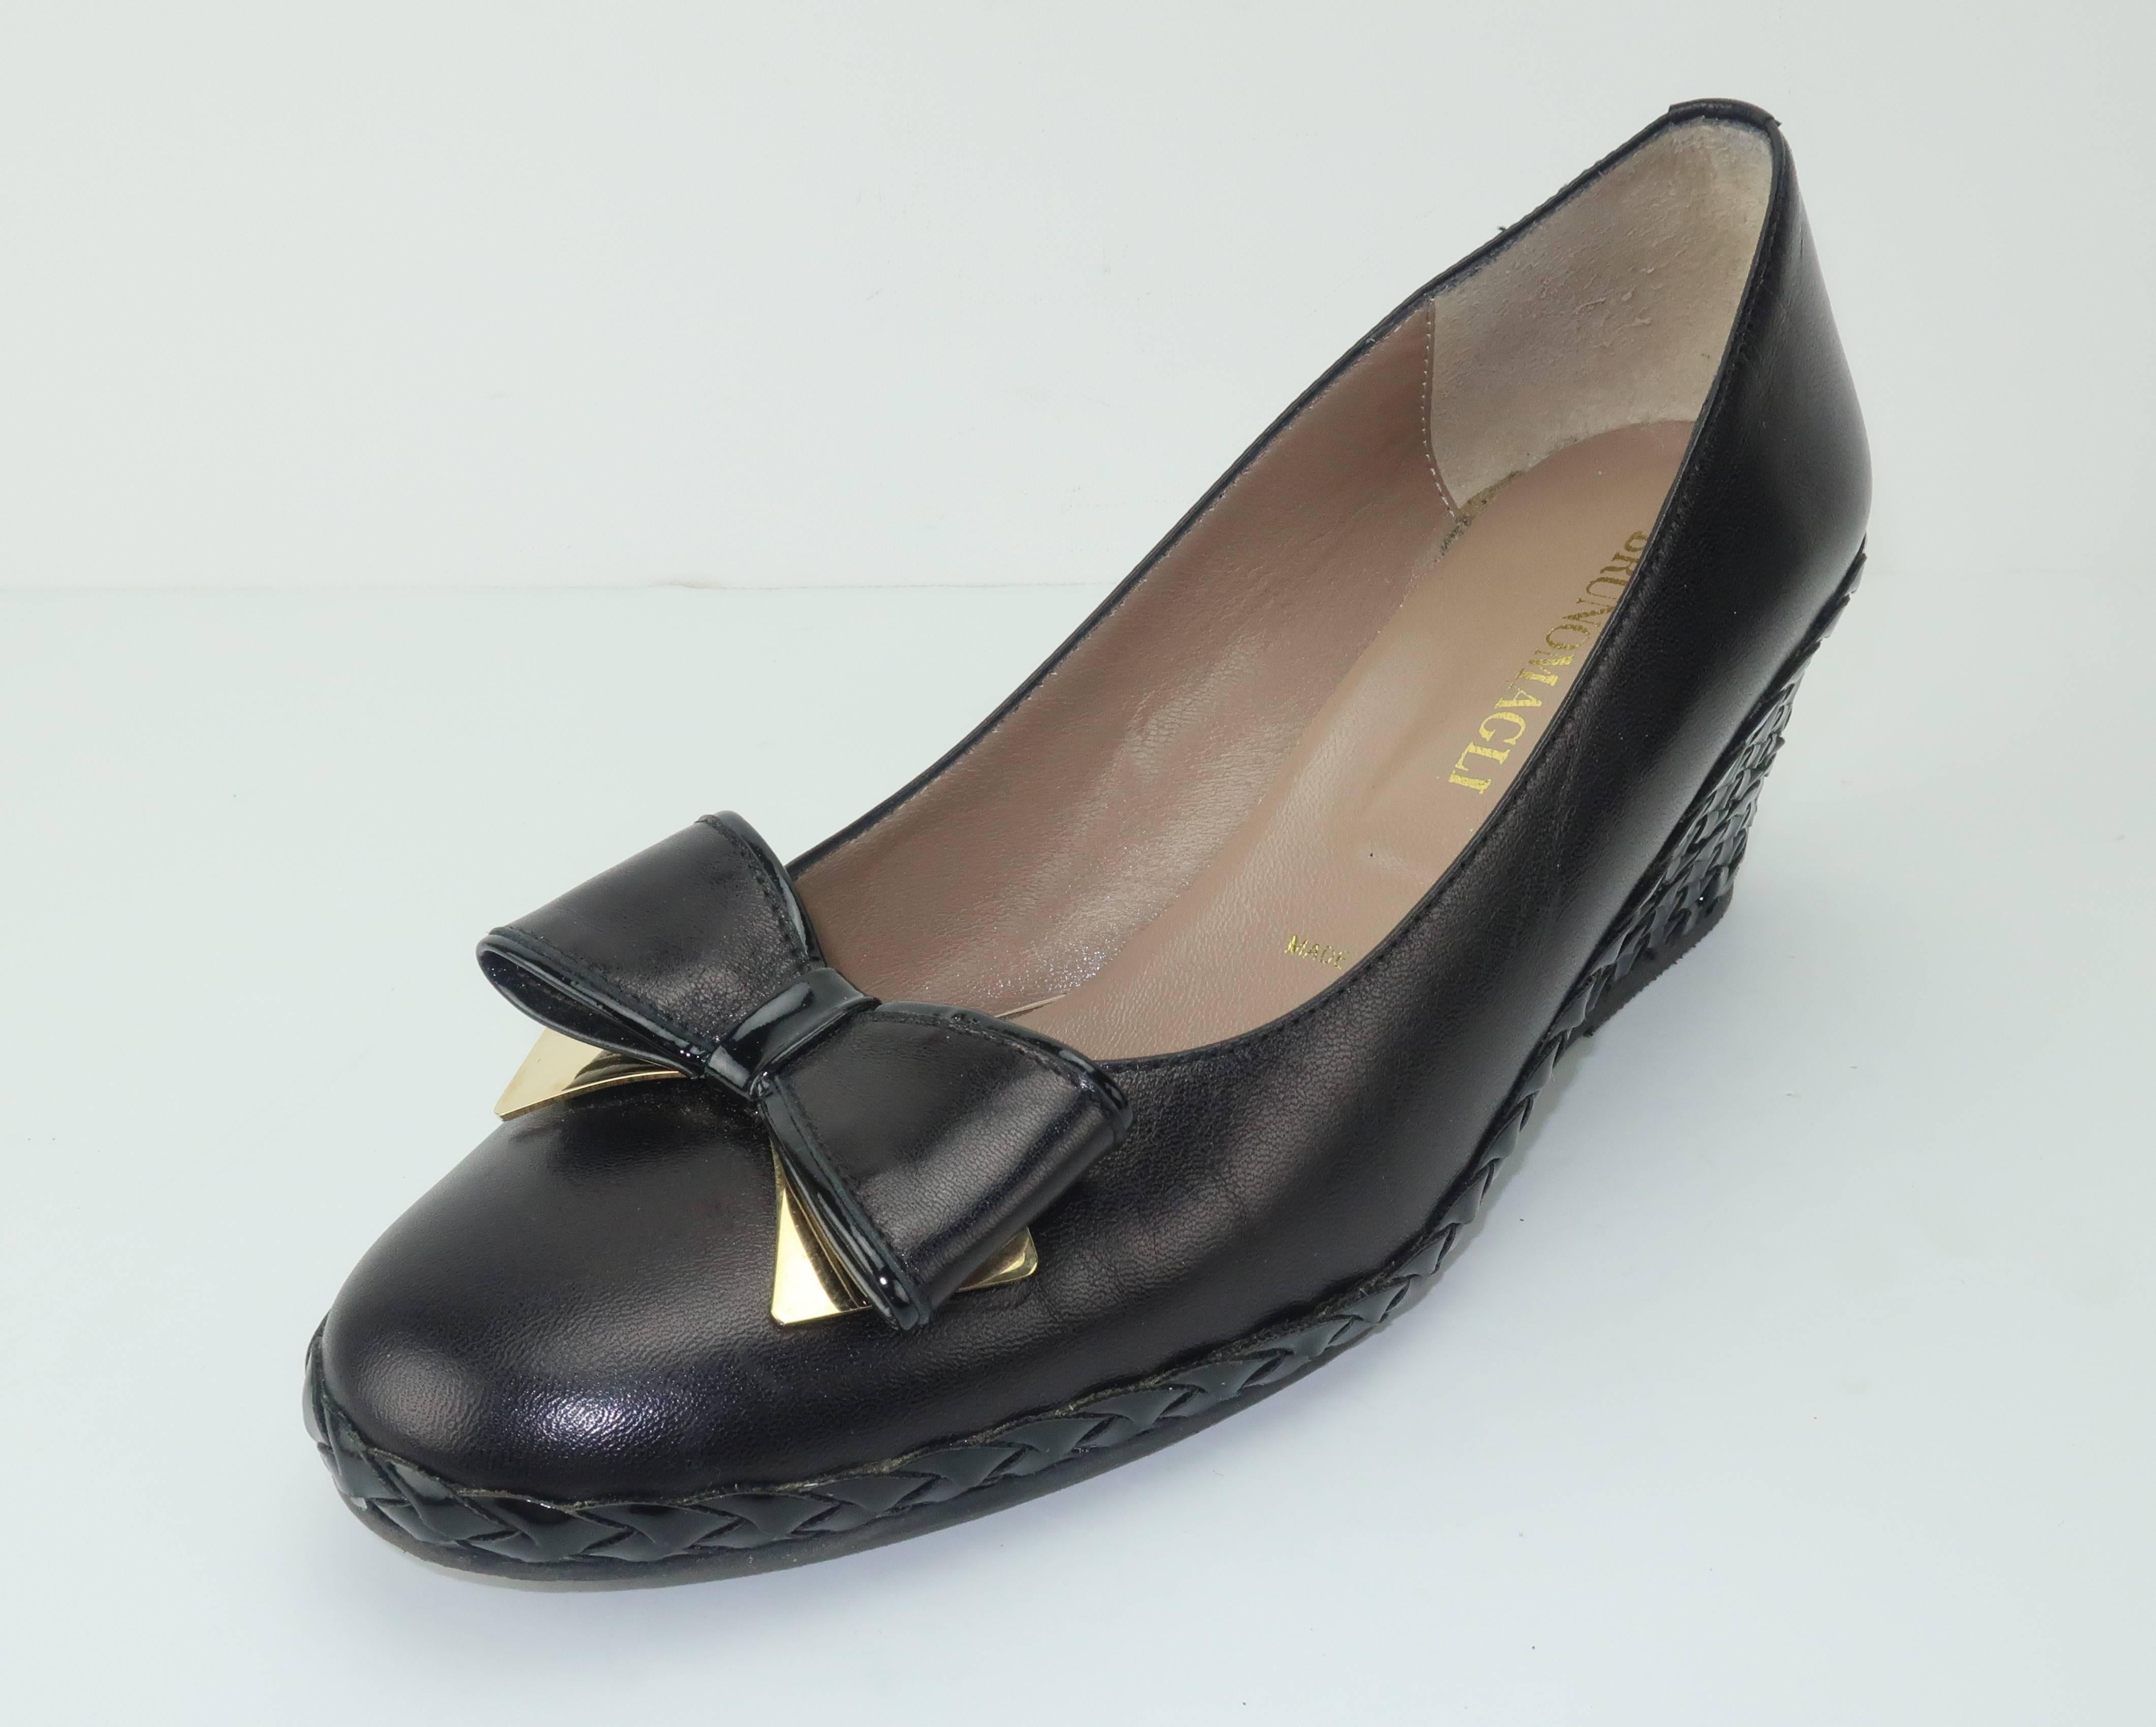 Bruno Magli Black Leather Wedge Shoes With Bow Tie Detail Sz 37 3